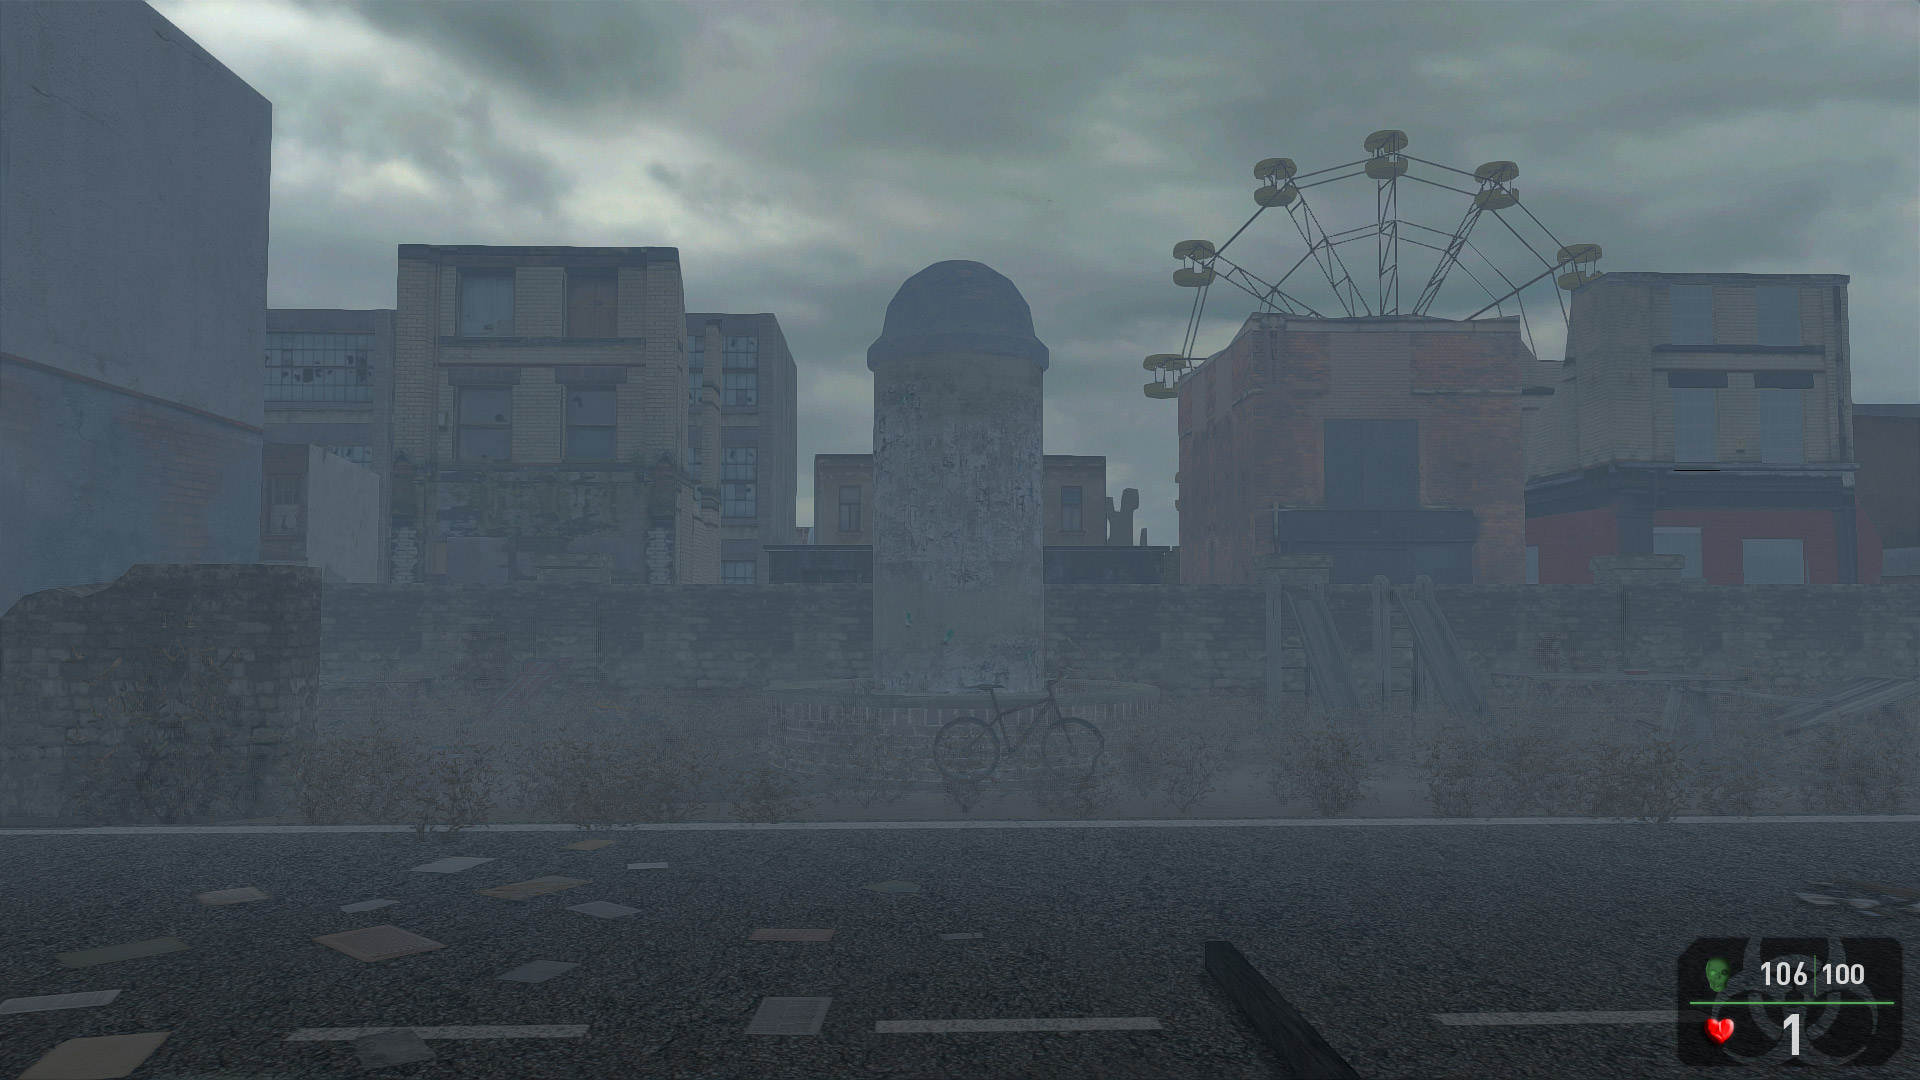 Deathly Storm: The Edge of Life screenshot